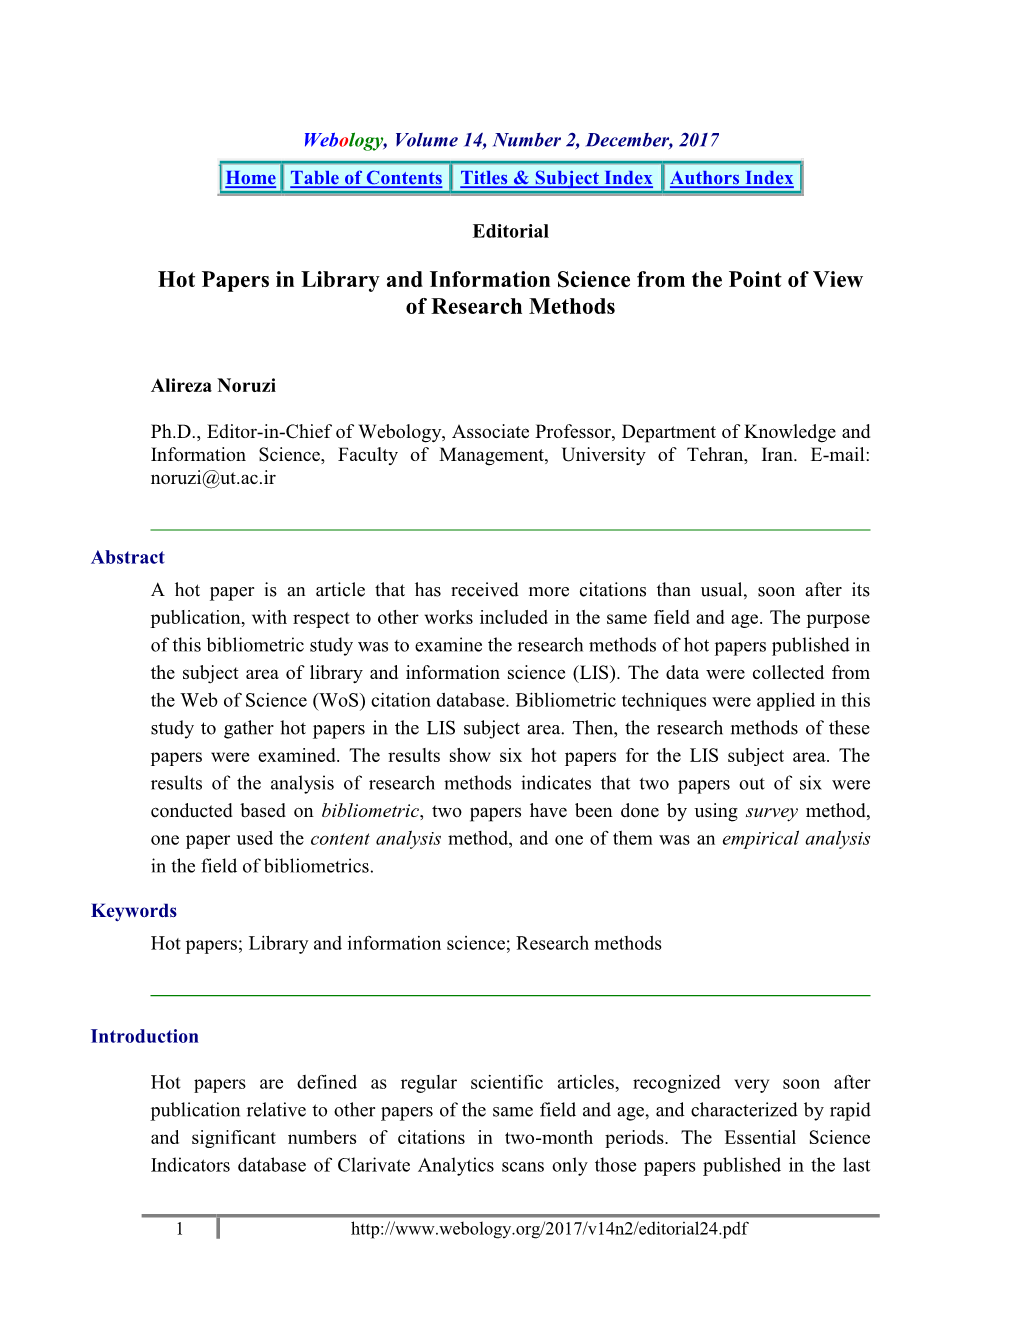 Hot Papers in Library and Information Science from the Point of View of Research Methods